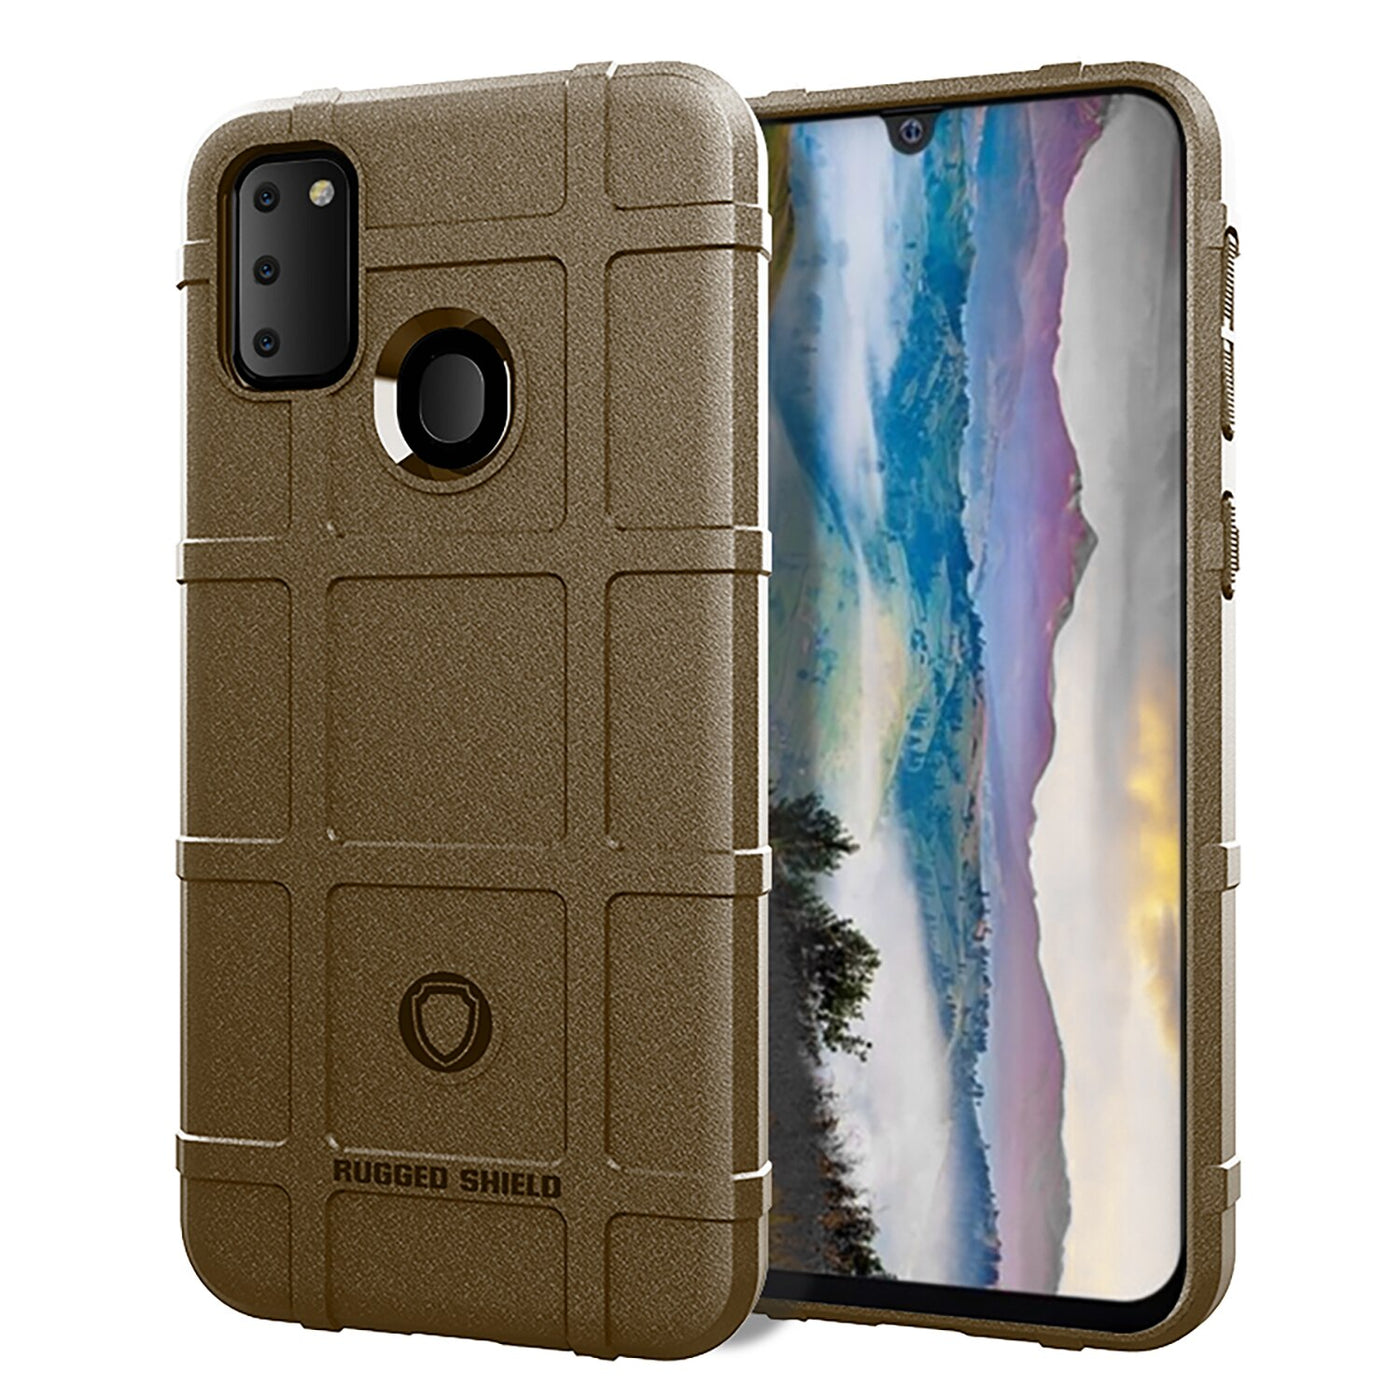 Samsung Galaxy M30s shockproof cover